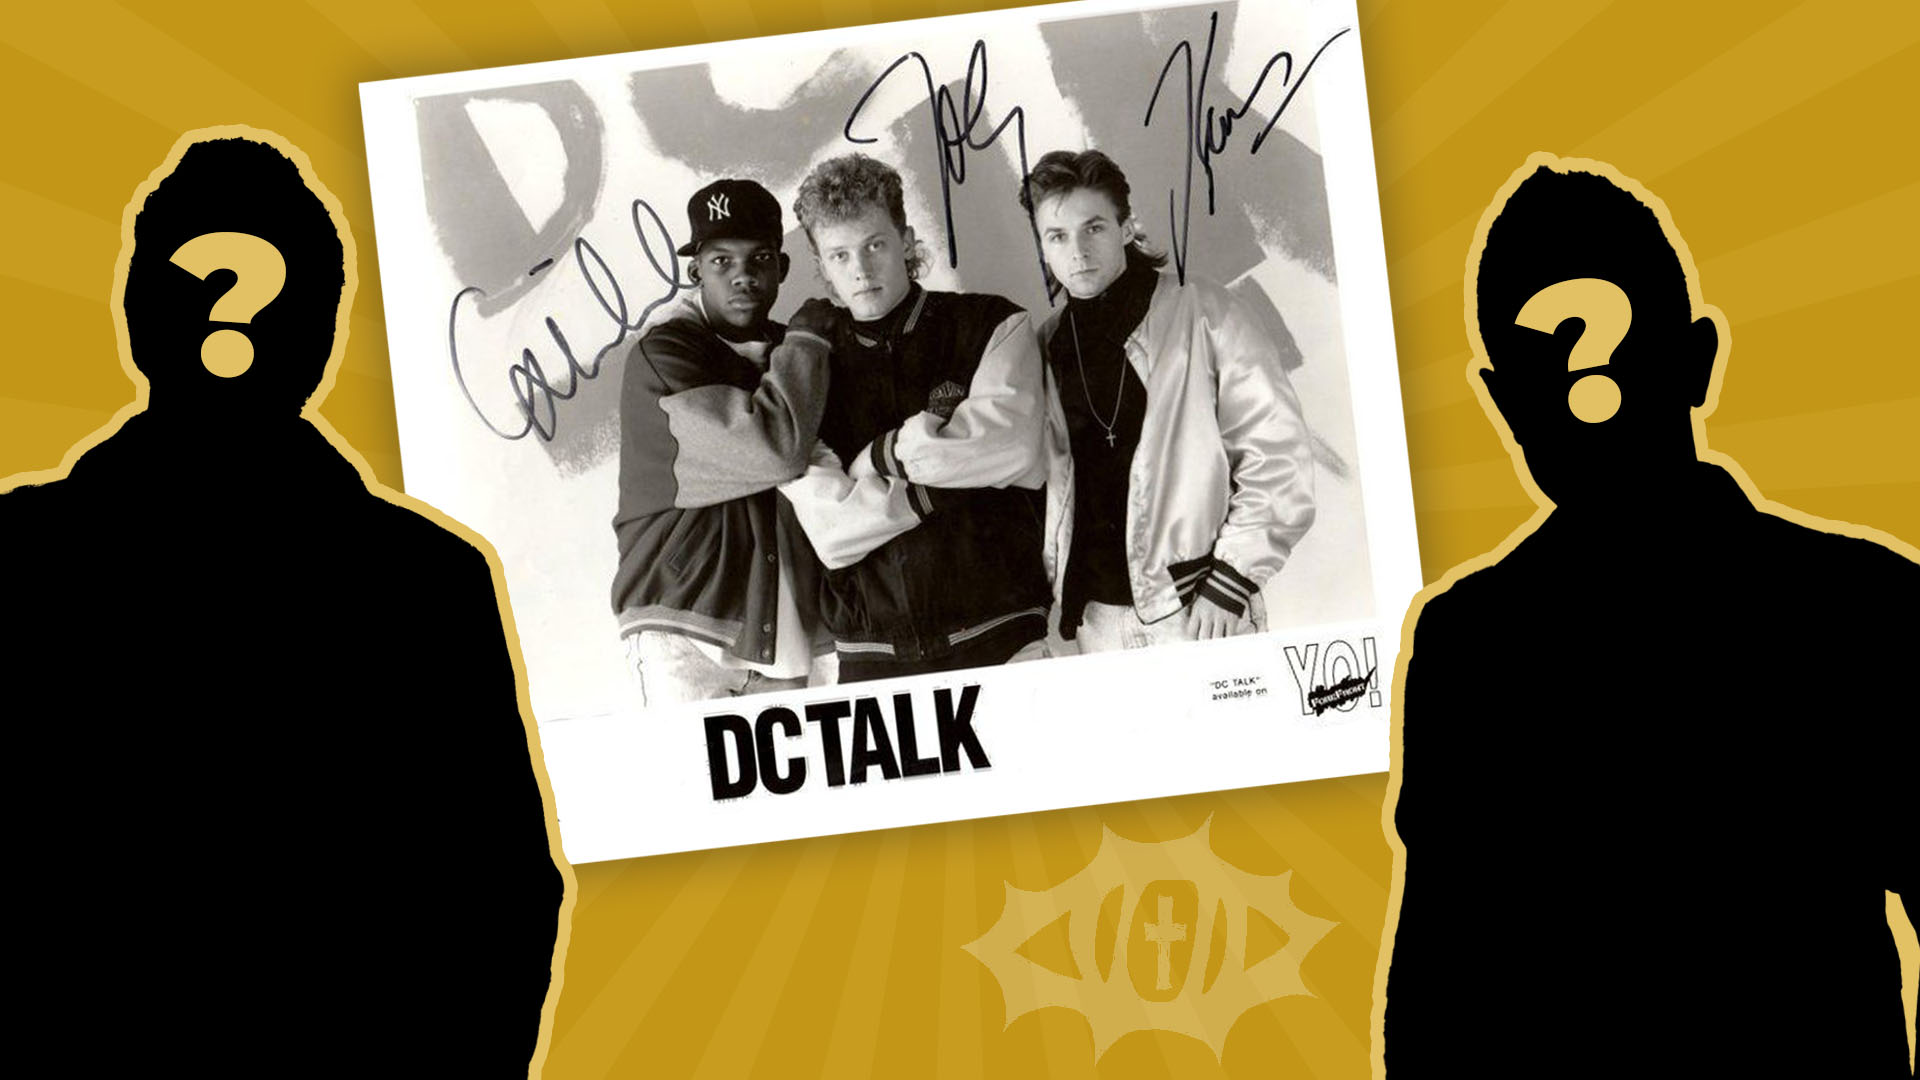 4 Christian Artists You Didn't Know Are DC Talk Fans - Way Nation